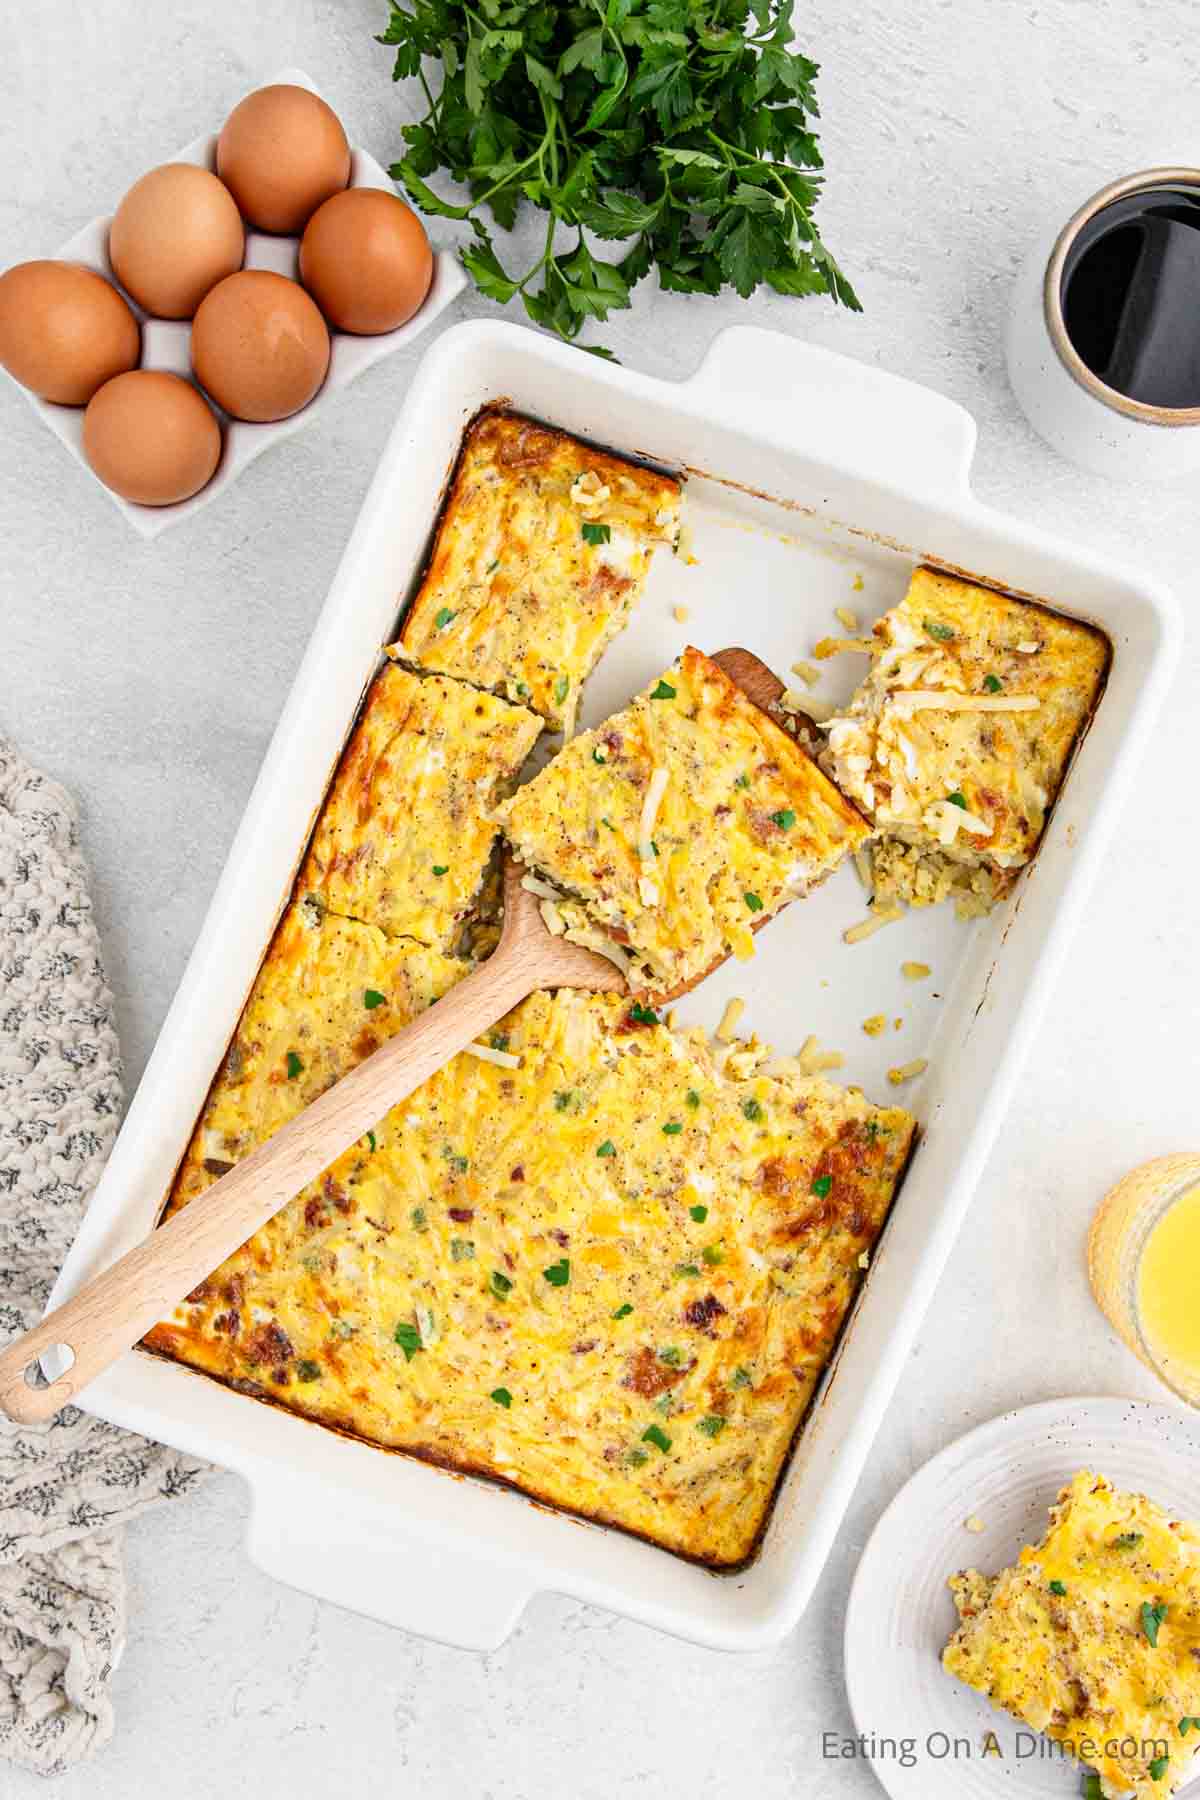 Bacon egg casserole in a baking dish with a serving on a wooden spatula